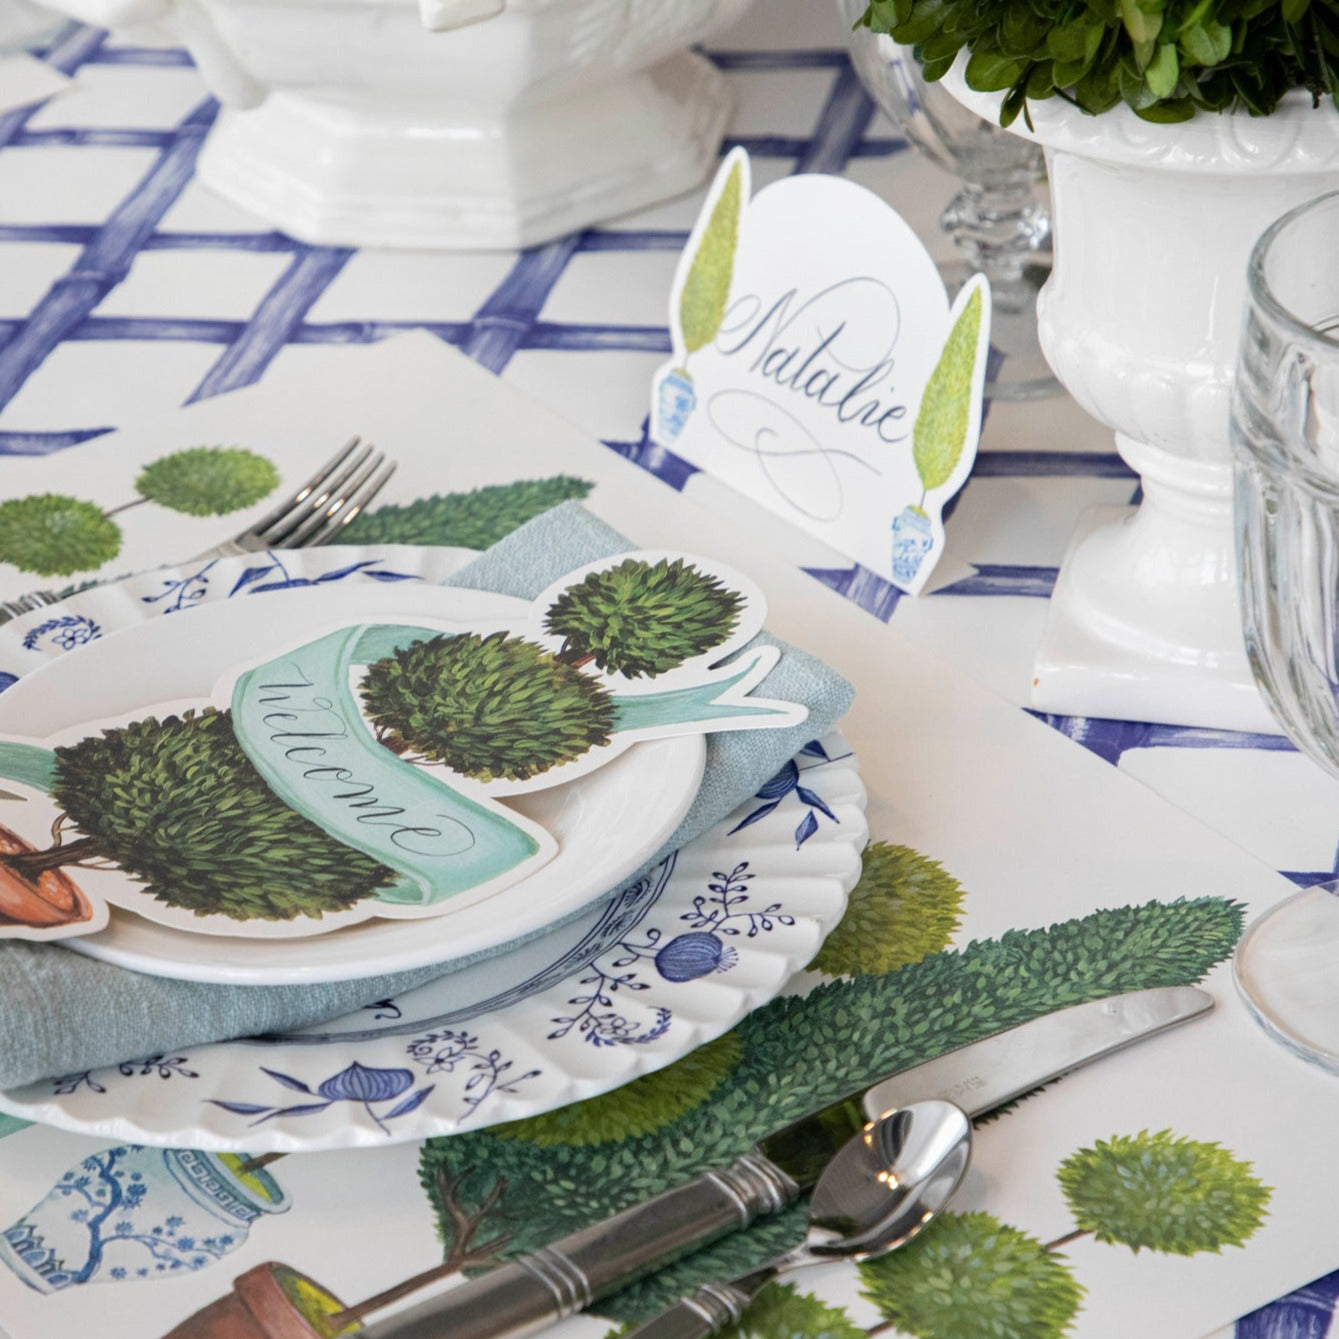 Close-up of the Topiary Garden Placemat in an elegant place setting, showing the illustrated foliage in detail.